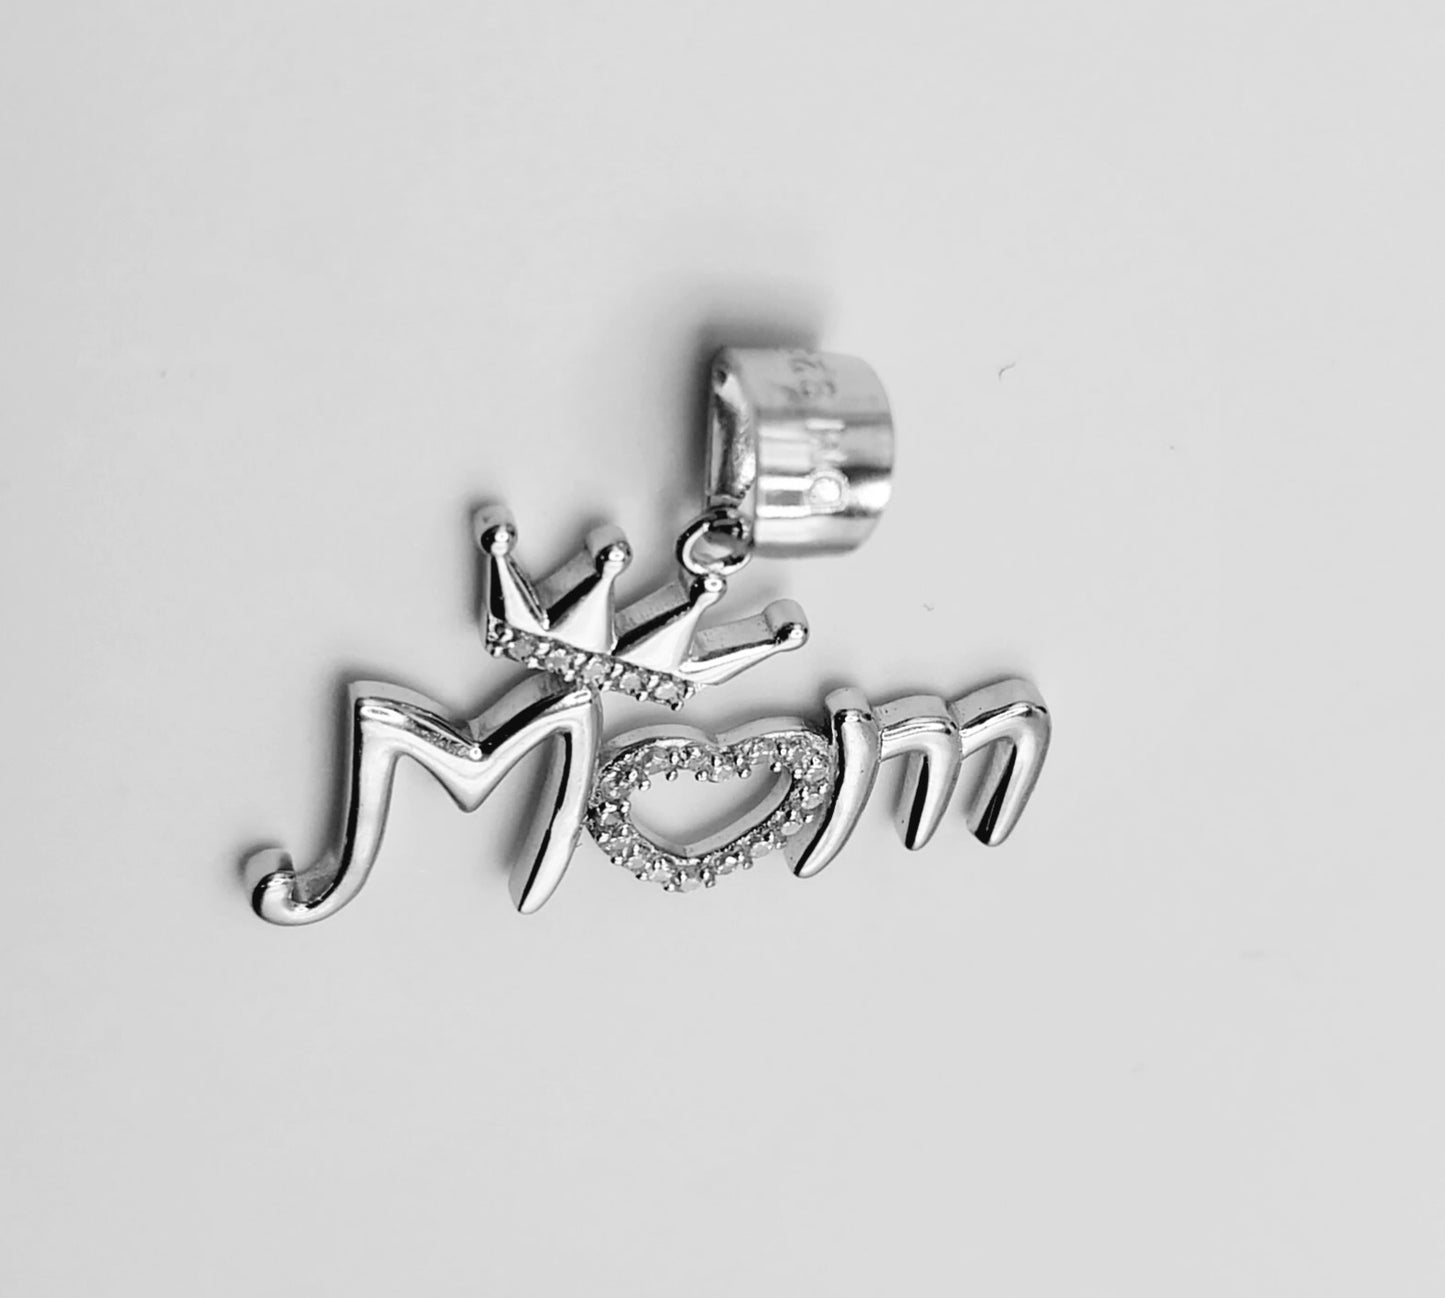 MOM with Crown Silver 925 Heart Pendant with Cubic Zirconia